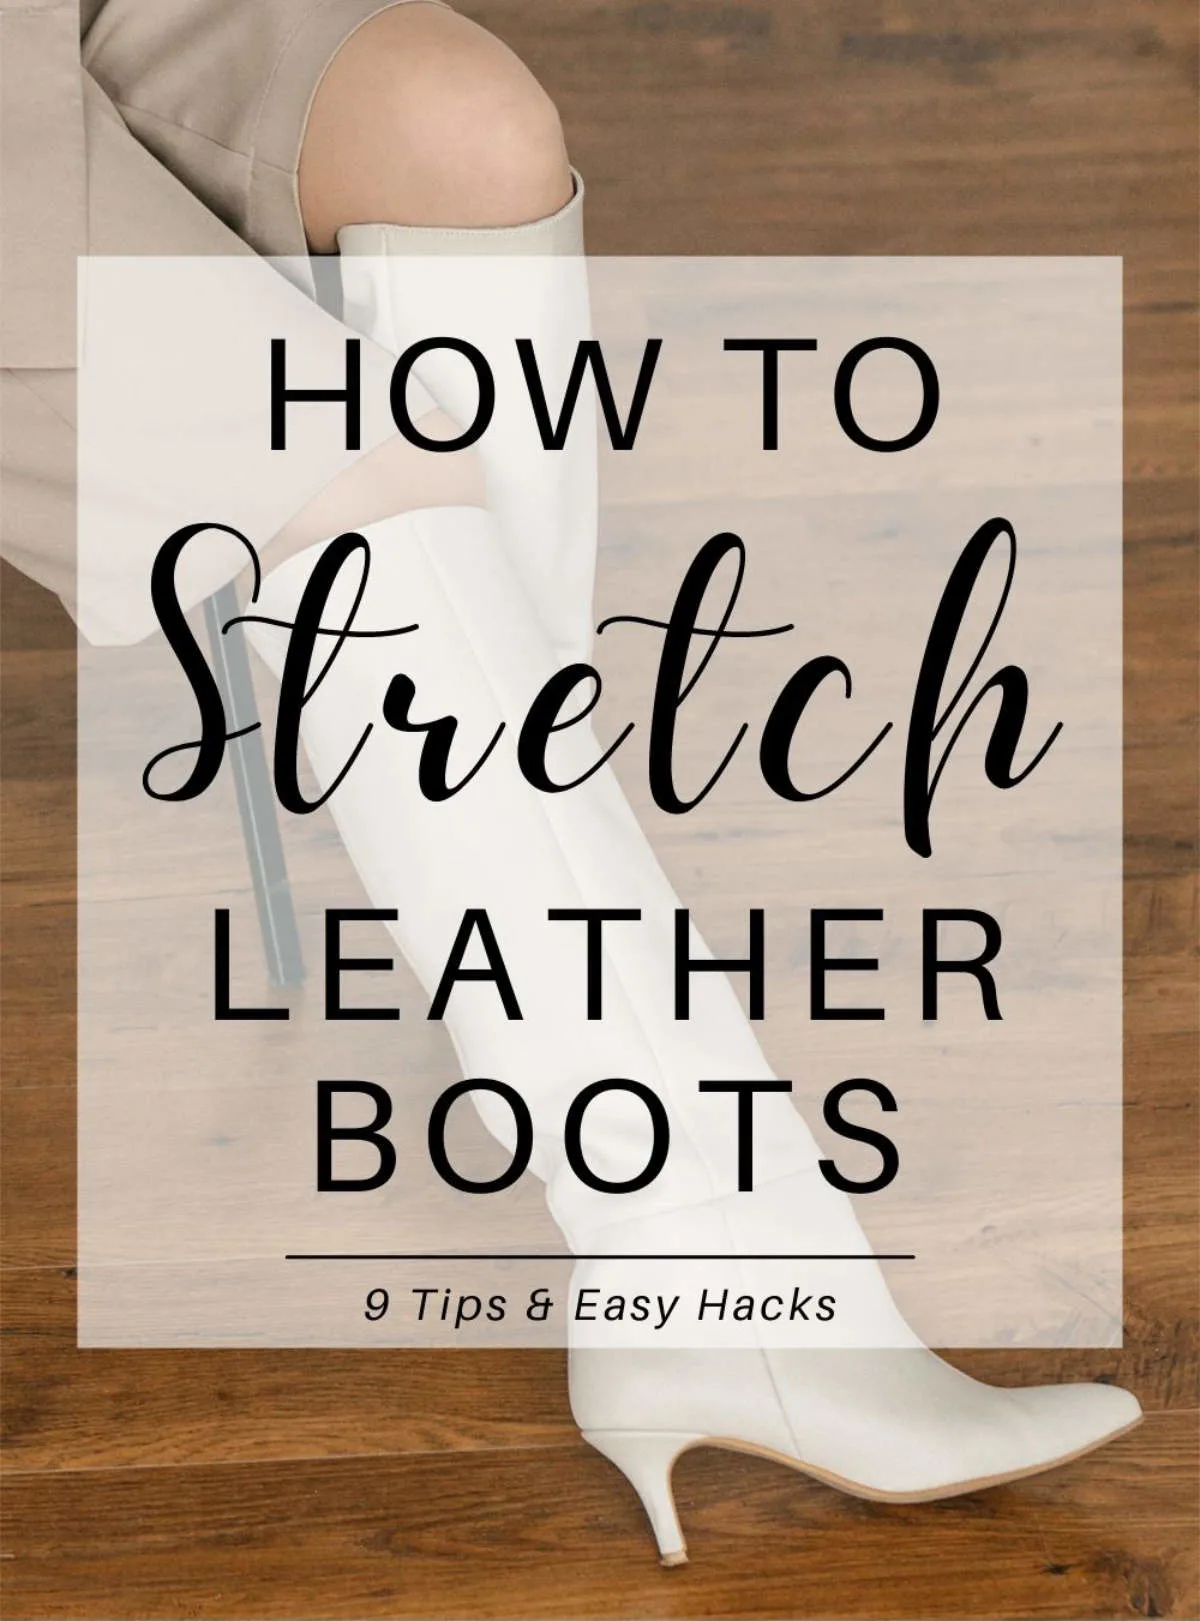 How to stretch leather boots text over close up of woman in kitten heel white knee boots on wooden floor.